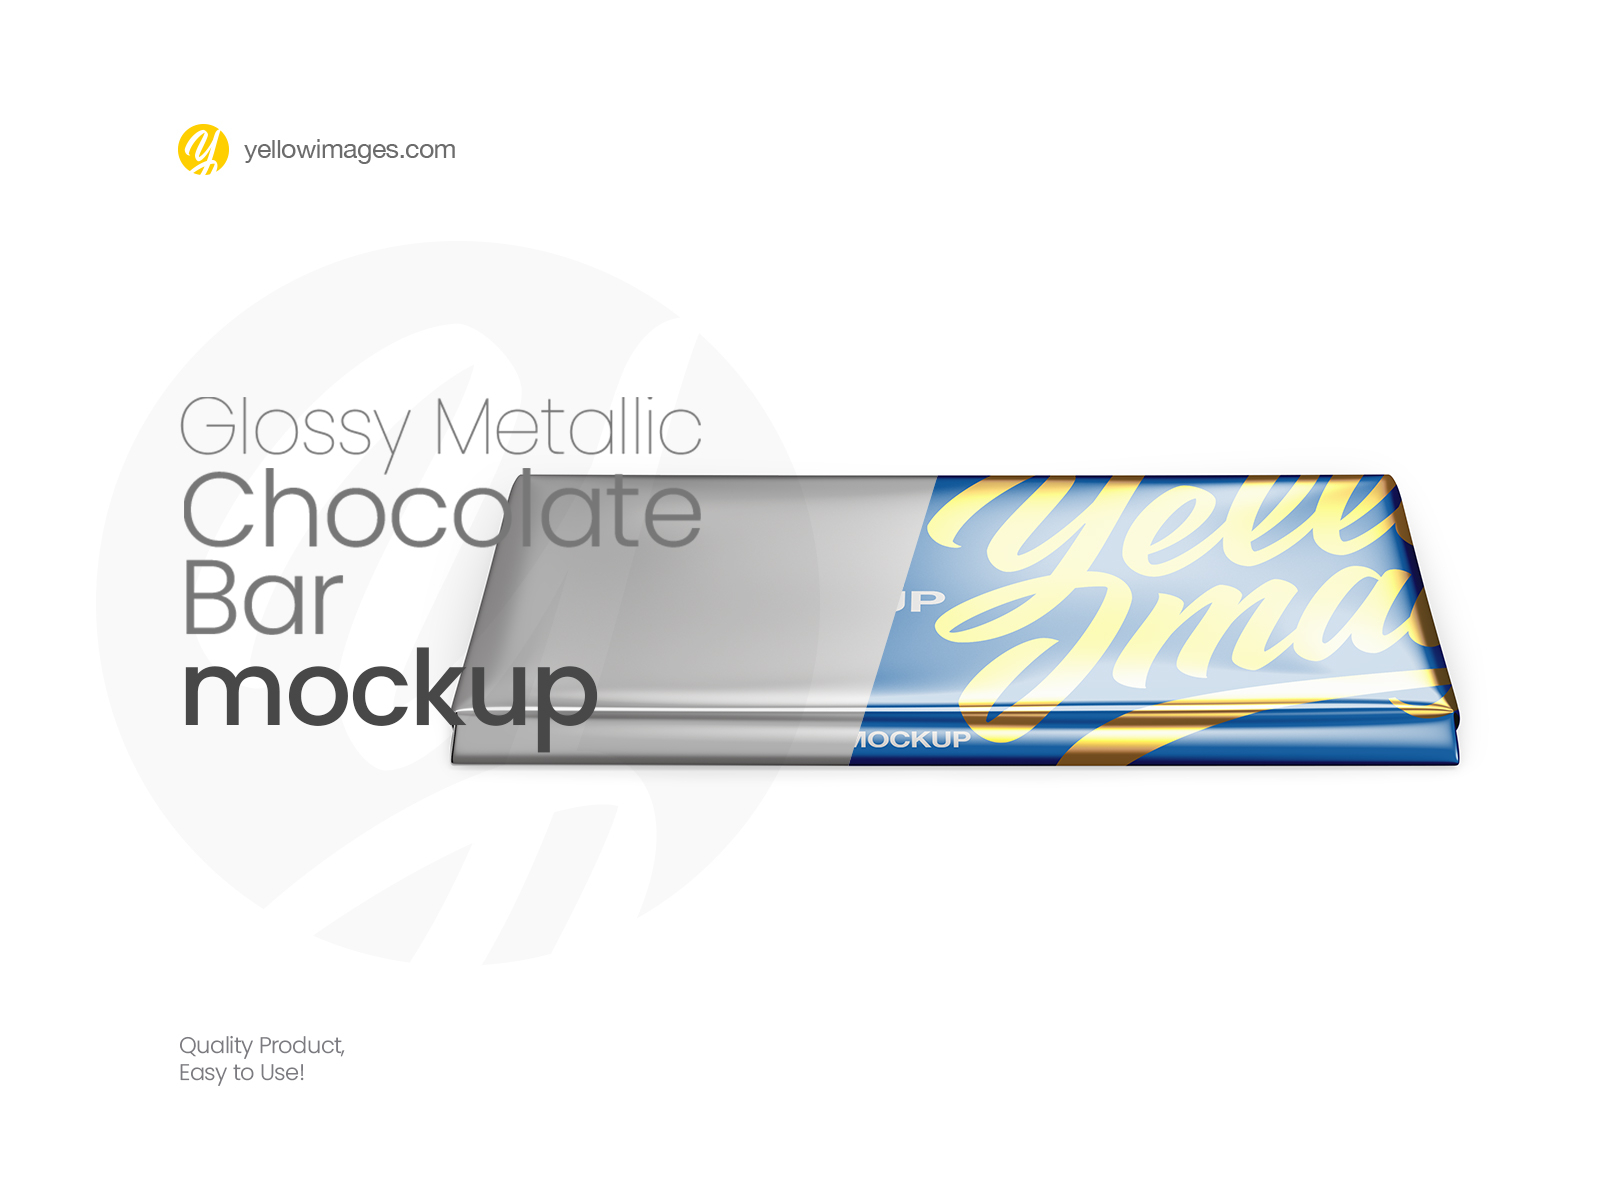 Download Glossy Metallic Chocolate Bar Mockup Front View By Dmytro Ovcharenko On Dribbble PSD Mockup Templates